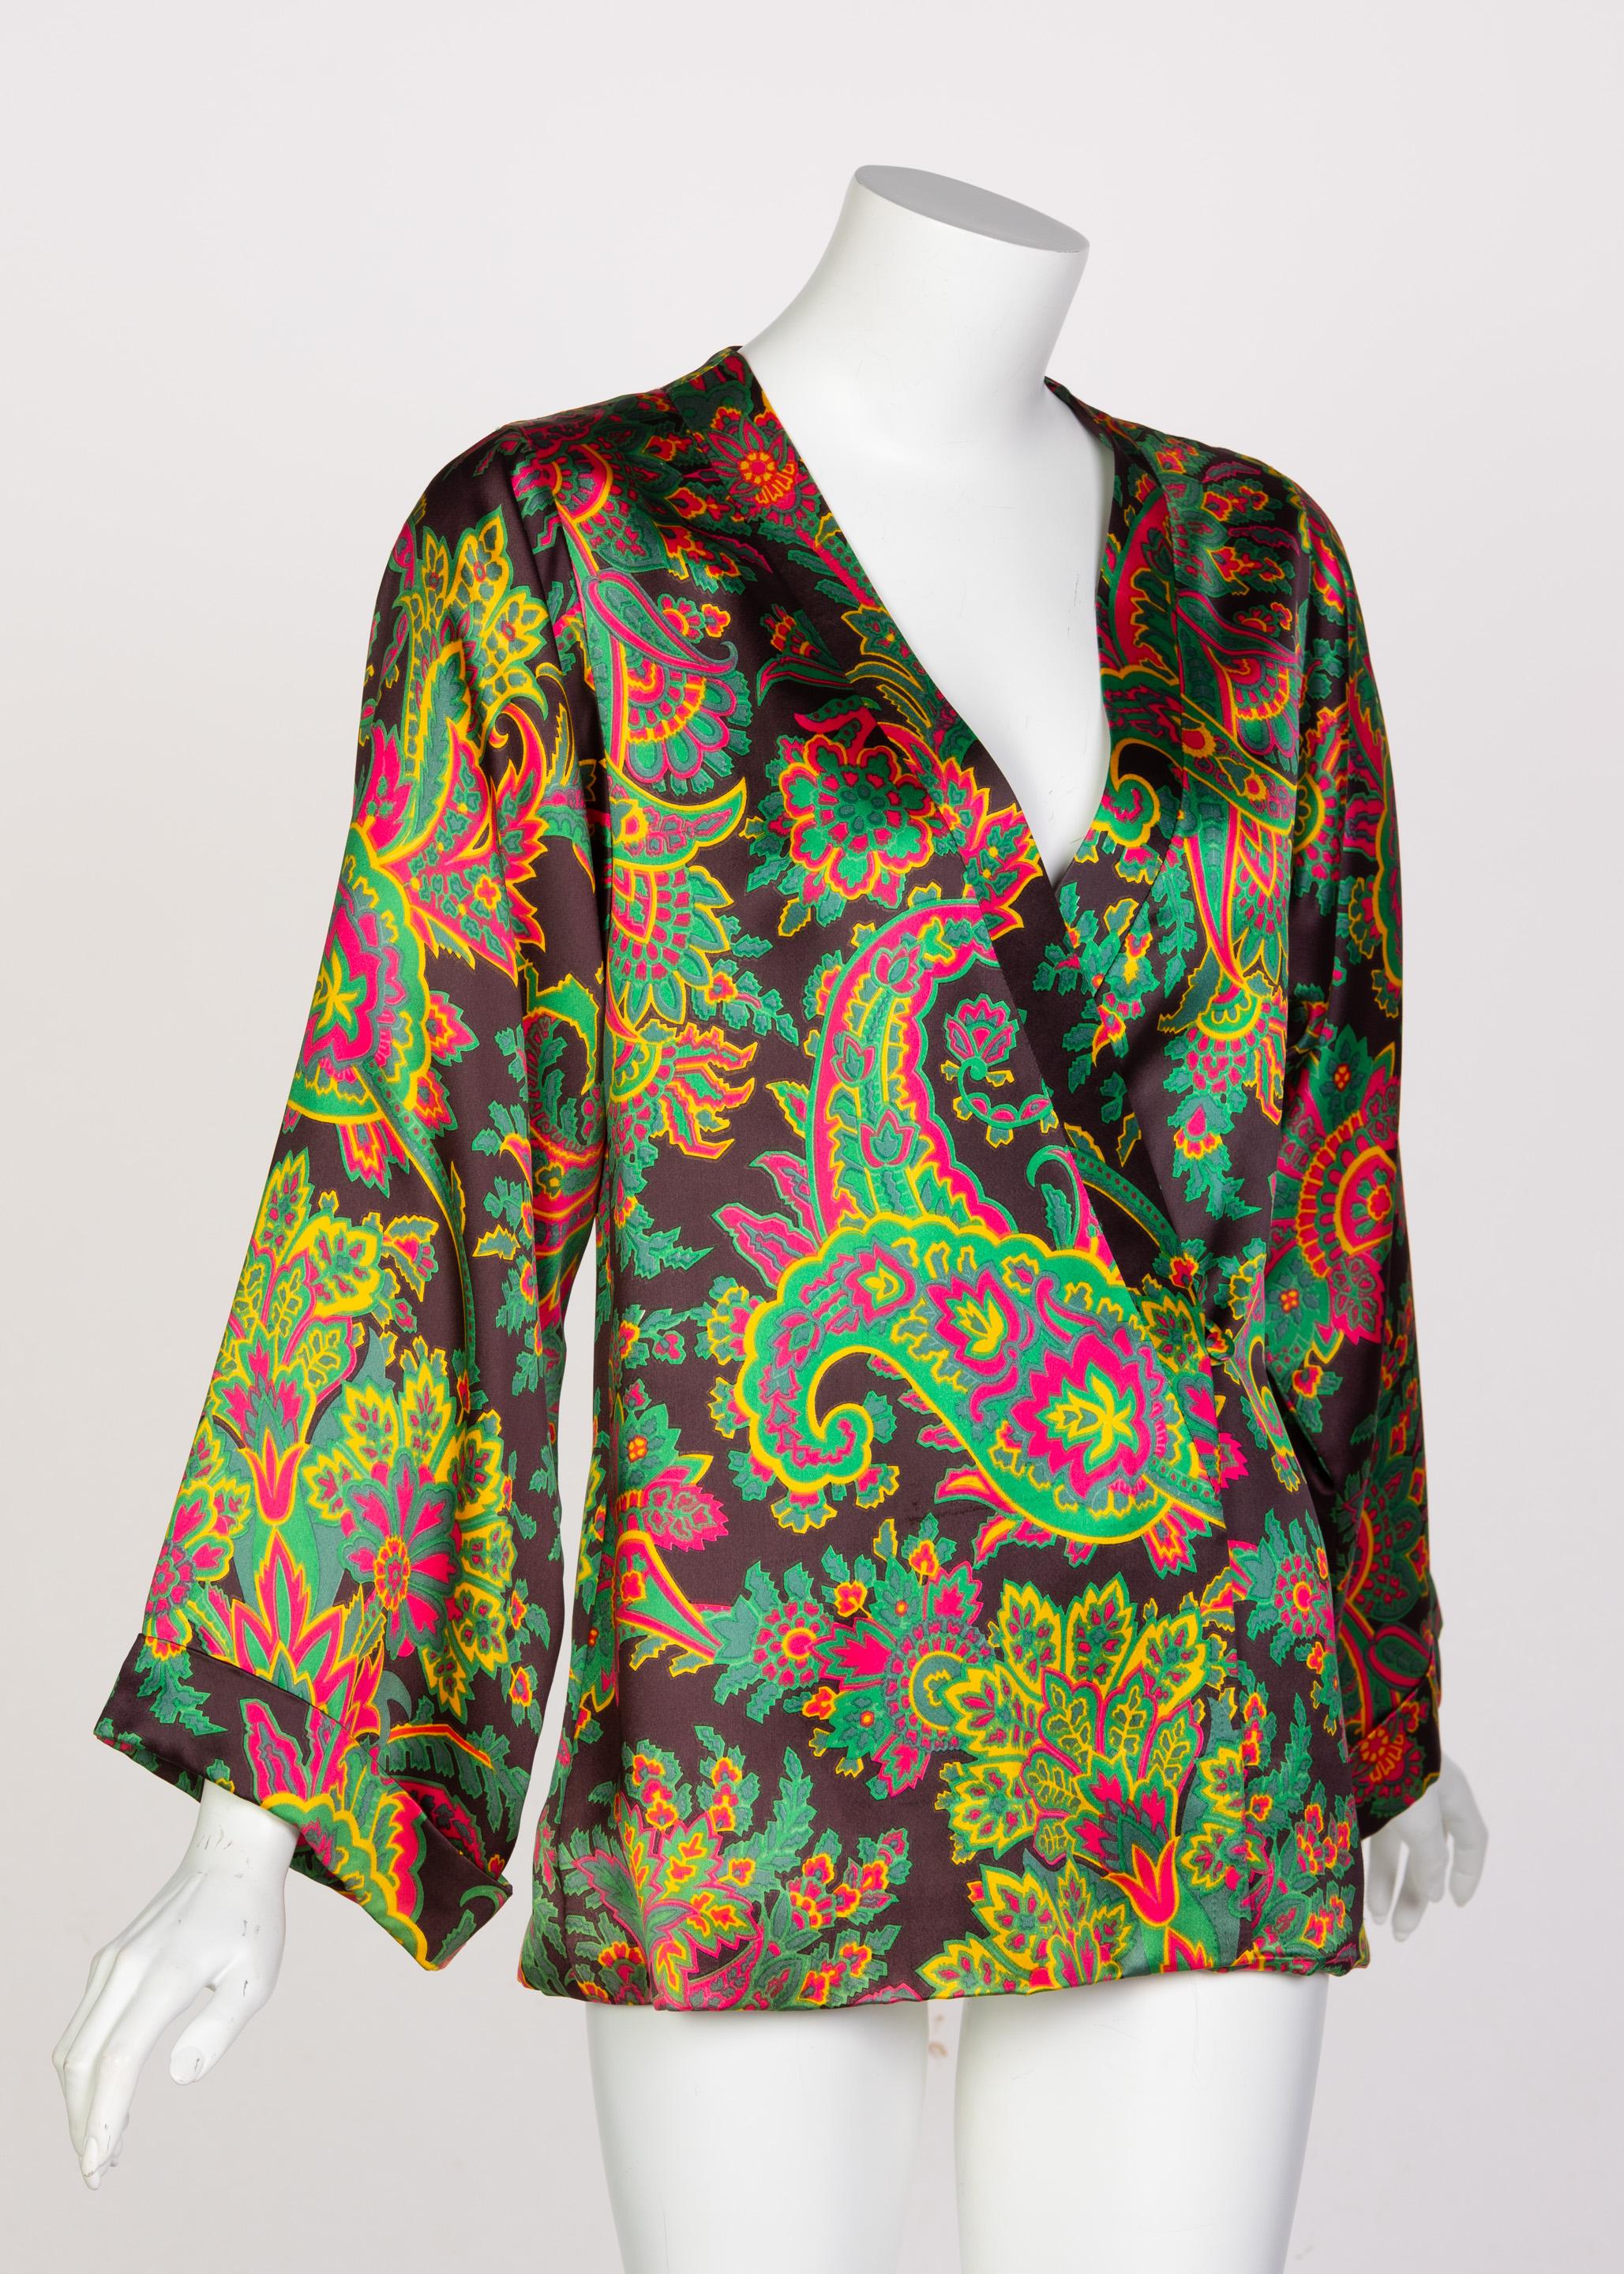 Yves Saint Laurent Psychedelic Paisley Silk Kimono Jacket YSL, 1967 In Excellent Condition For Sale In Boca Raton, FL